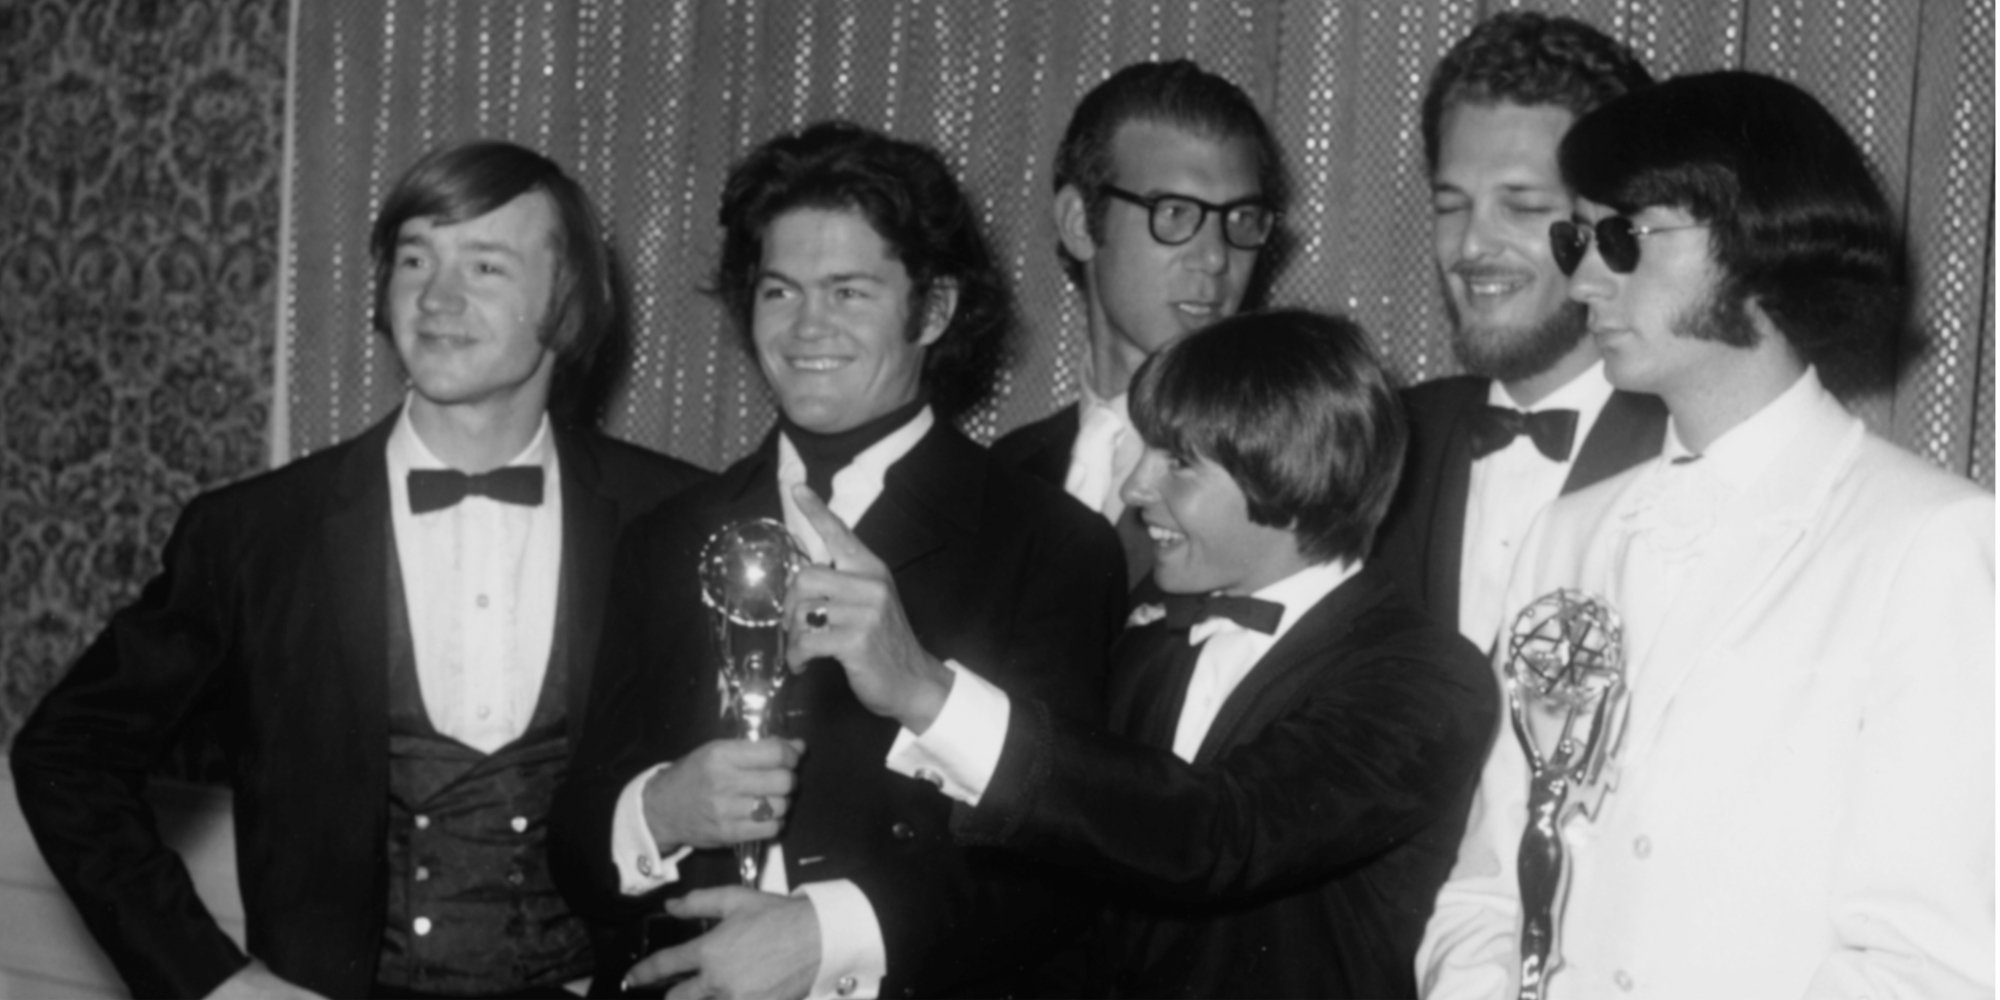 The Monkees cast includes Davy Jones, Mike Nesmith, Mickey Dolenz, and Peter Tork with producers Bob Rafelson and Bert Schneider at the Emmy Awards.